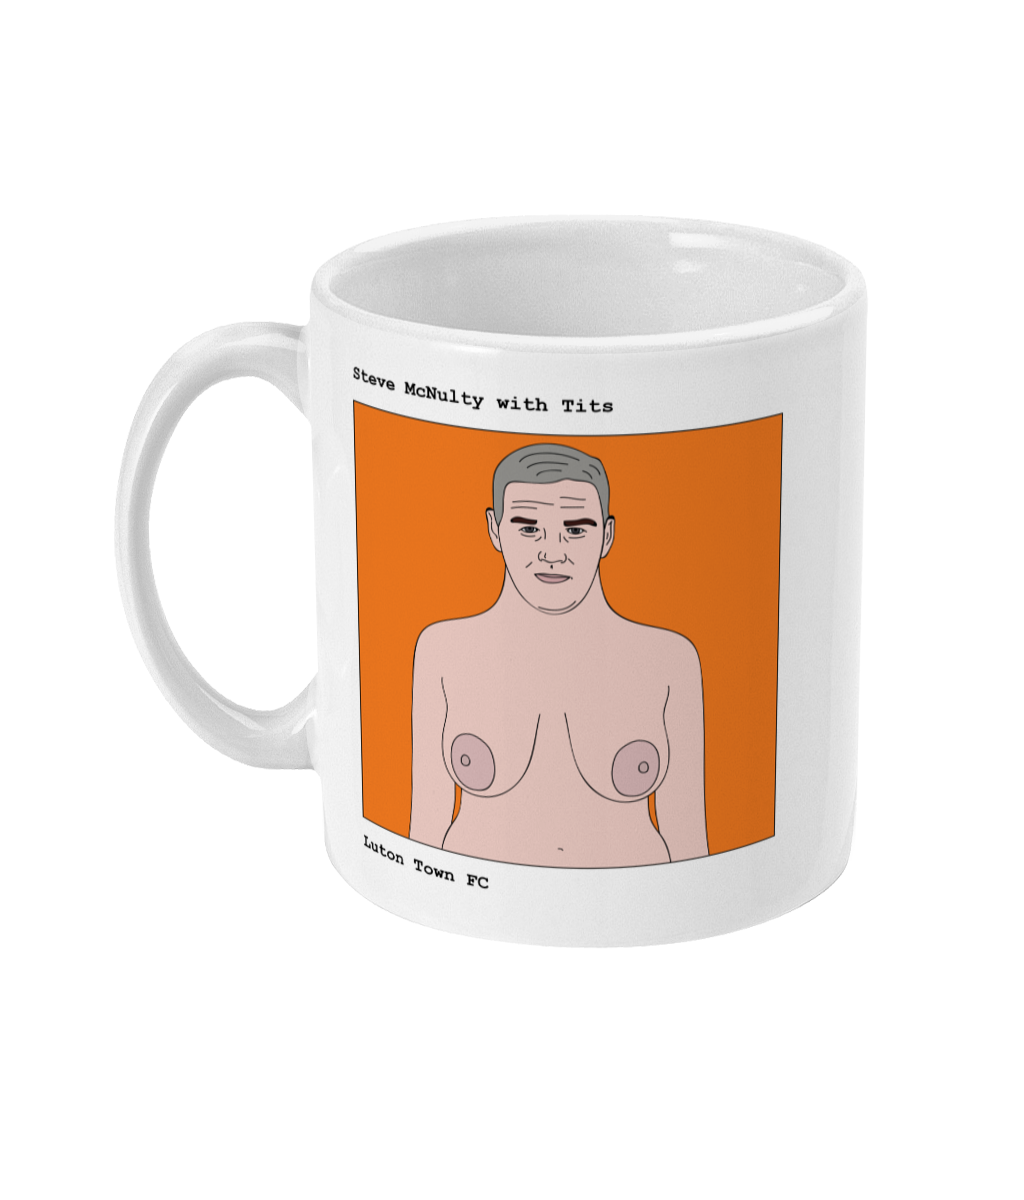 Steve McNulty with Tits - Footballers with Tits